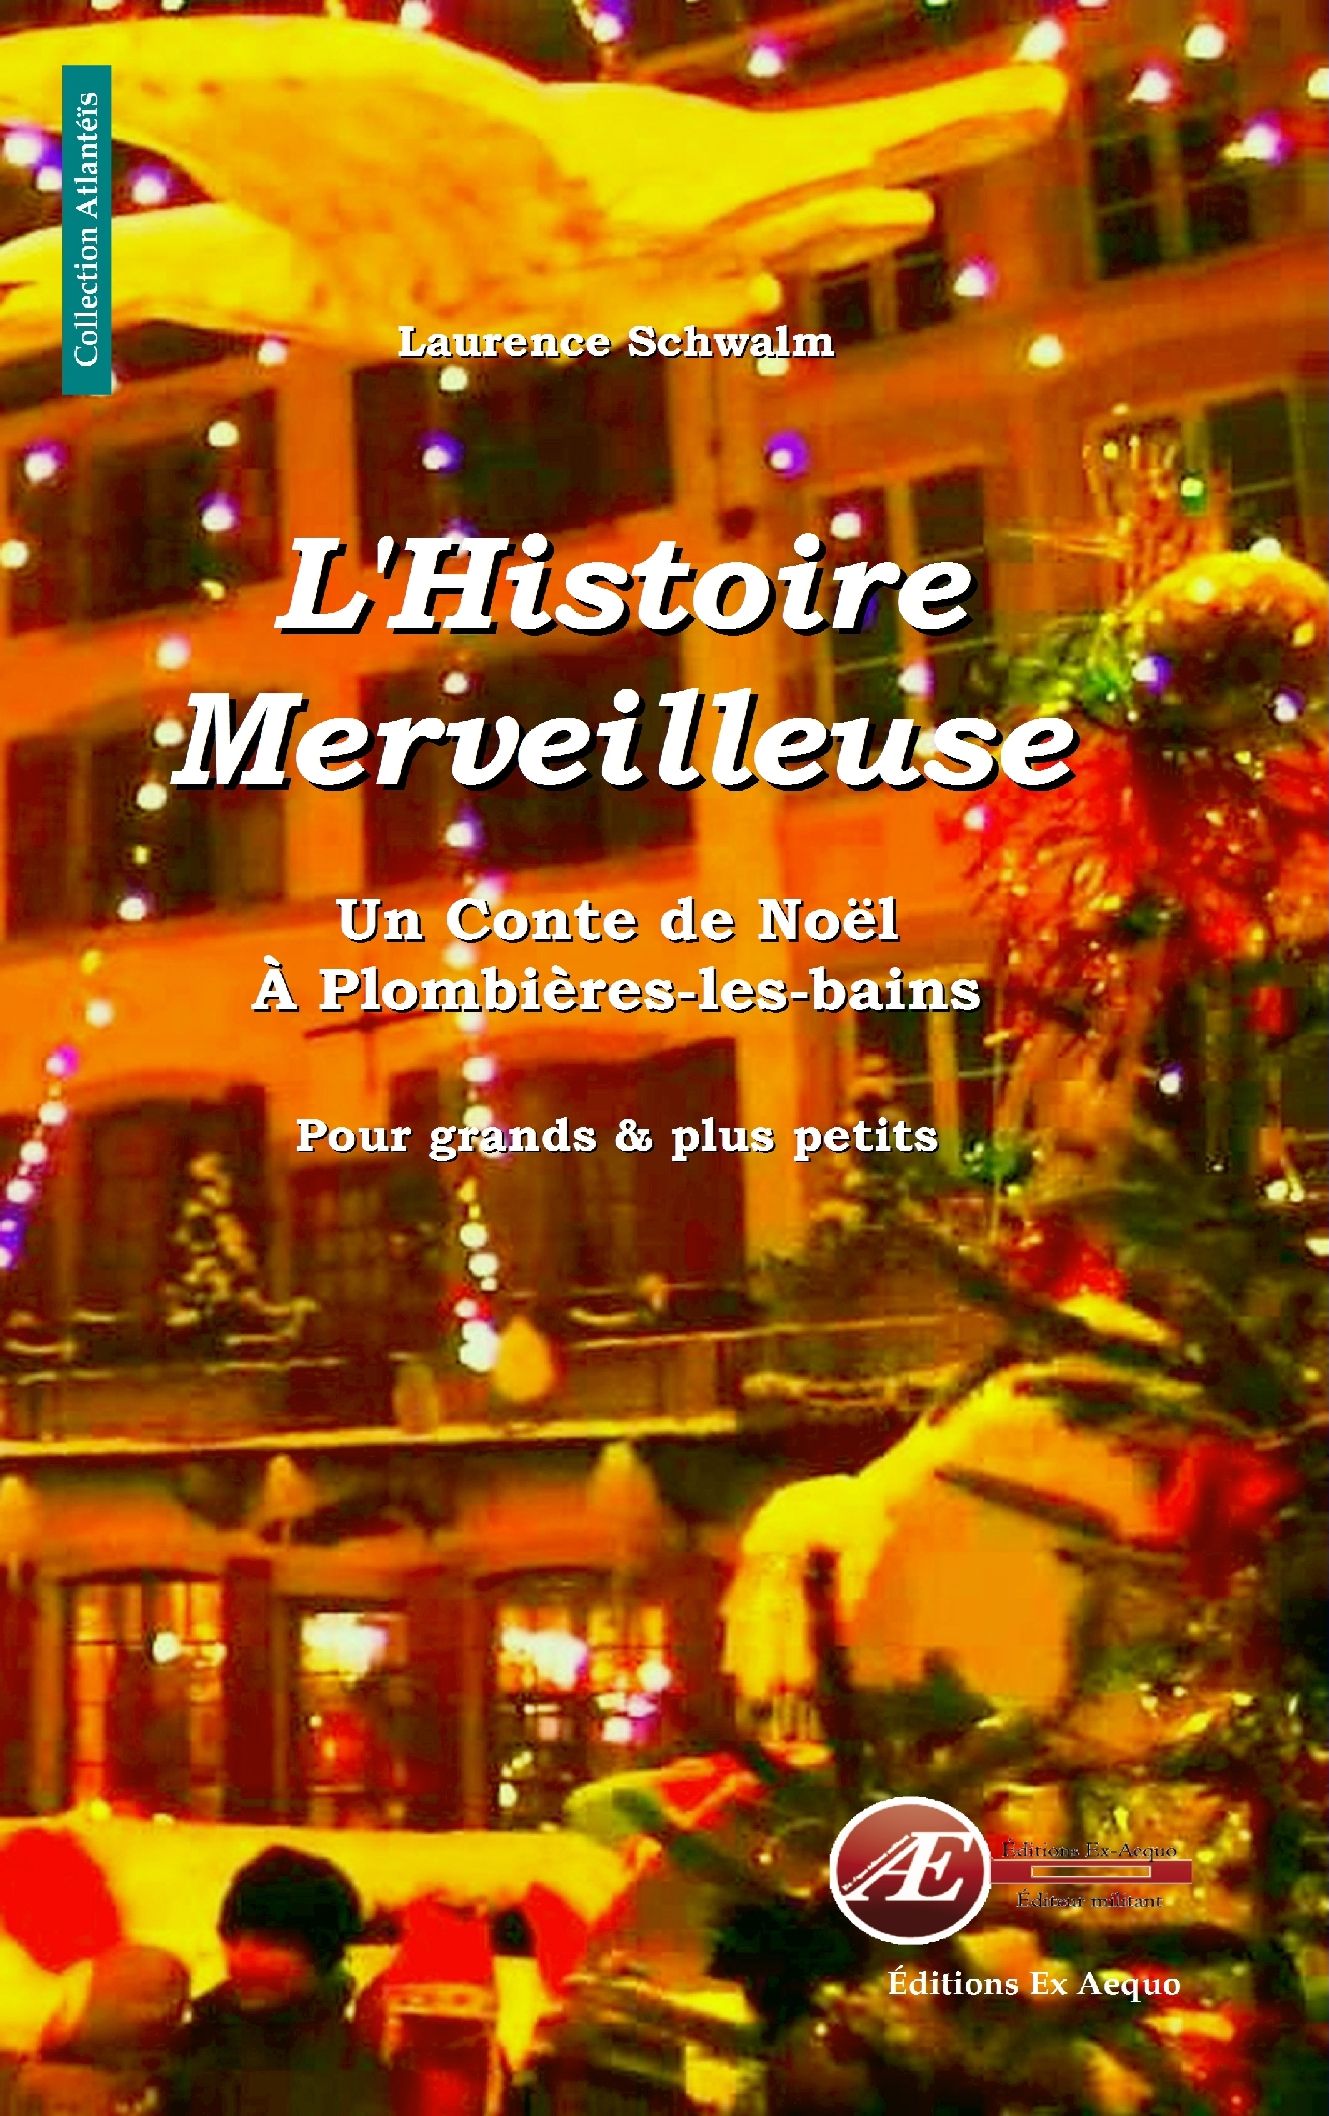 You are currently viewing L’histoire merveilleuse, de Laurence Schwalm